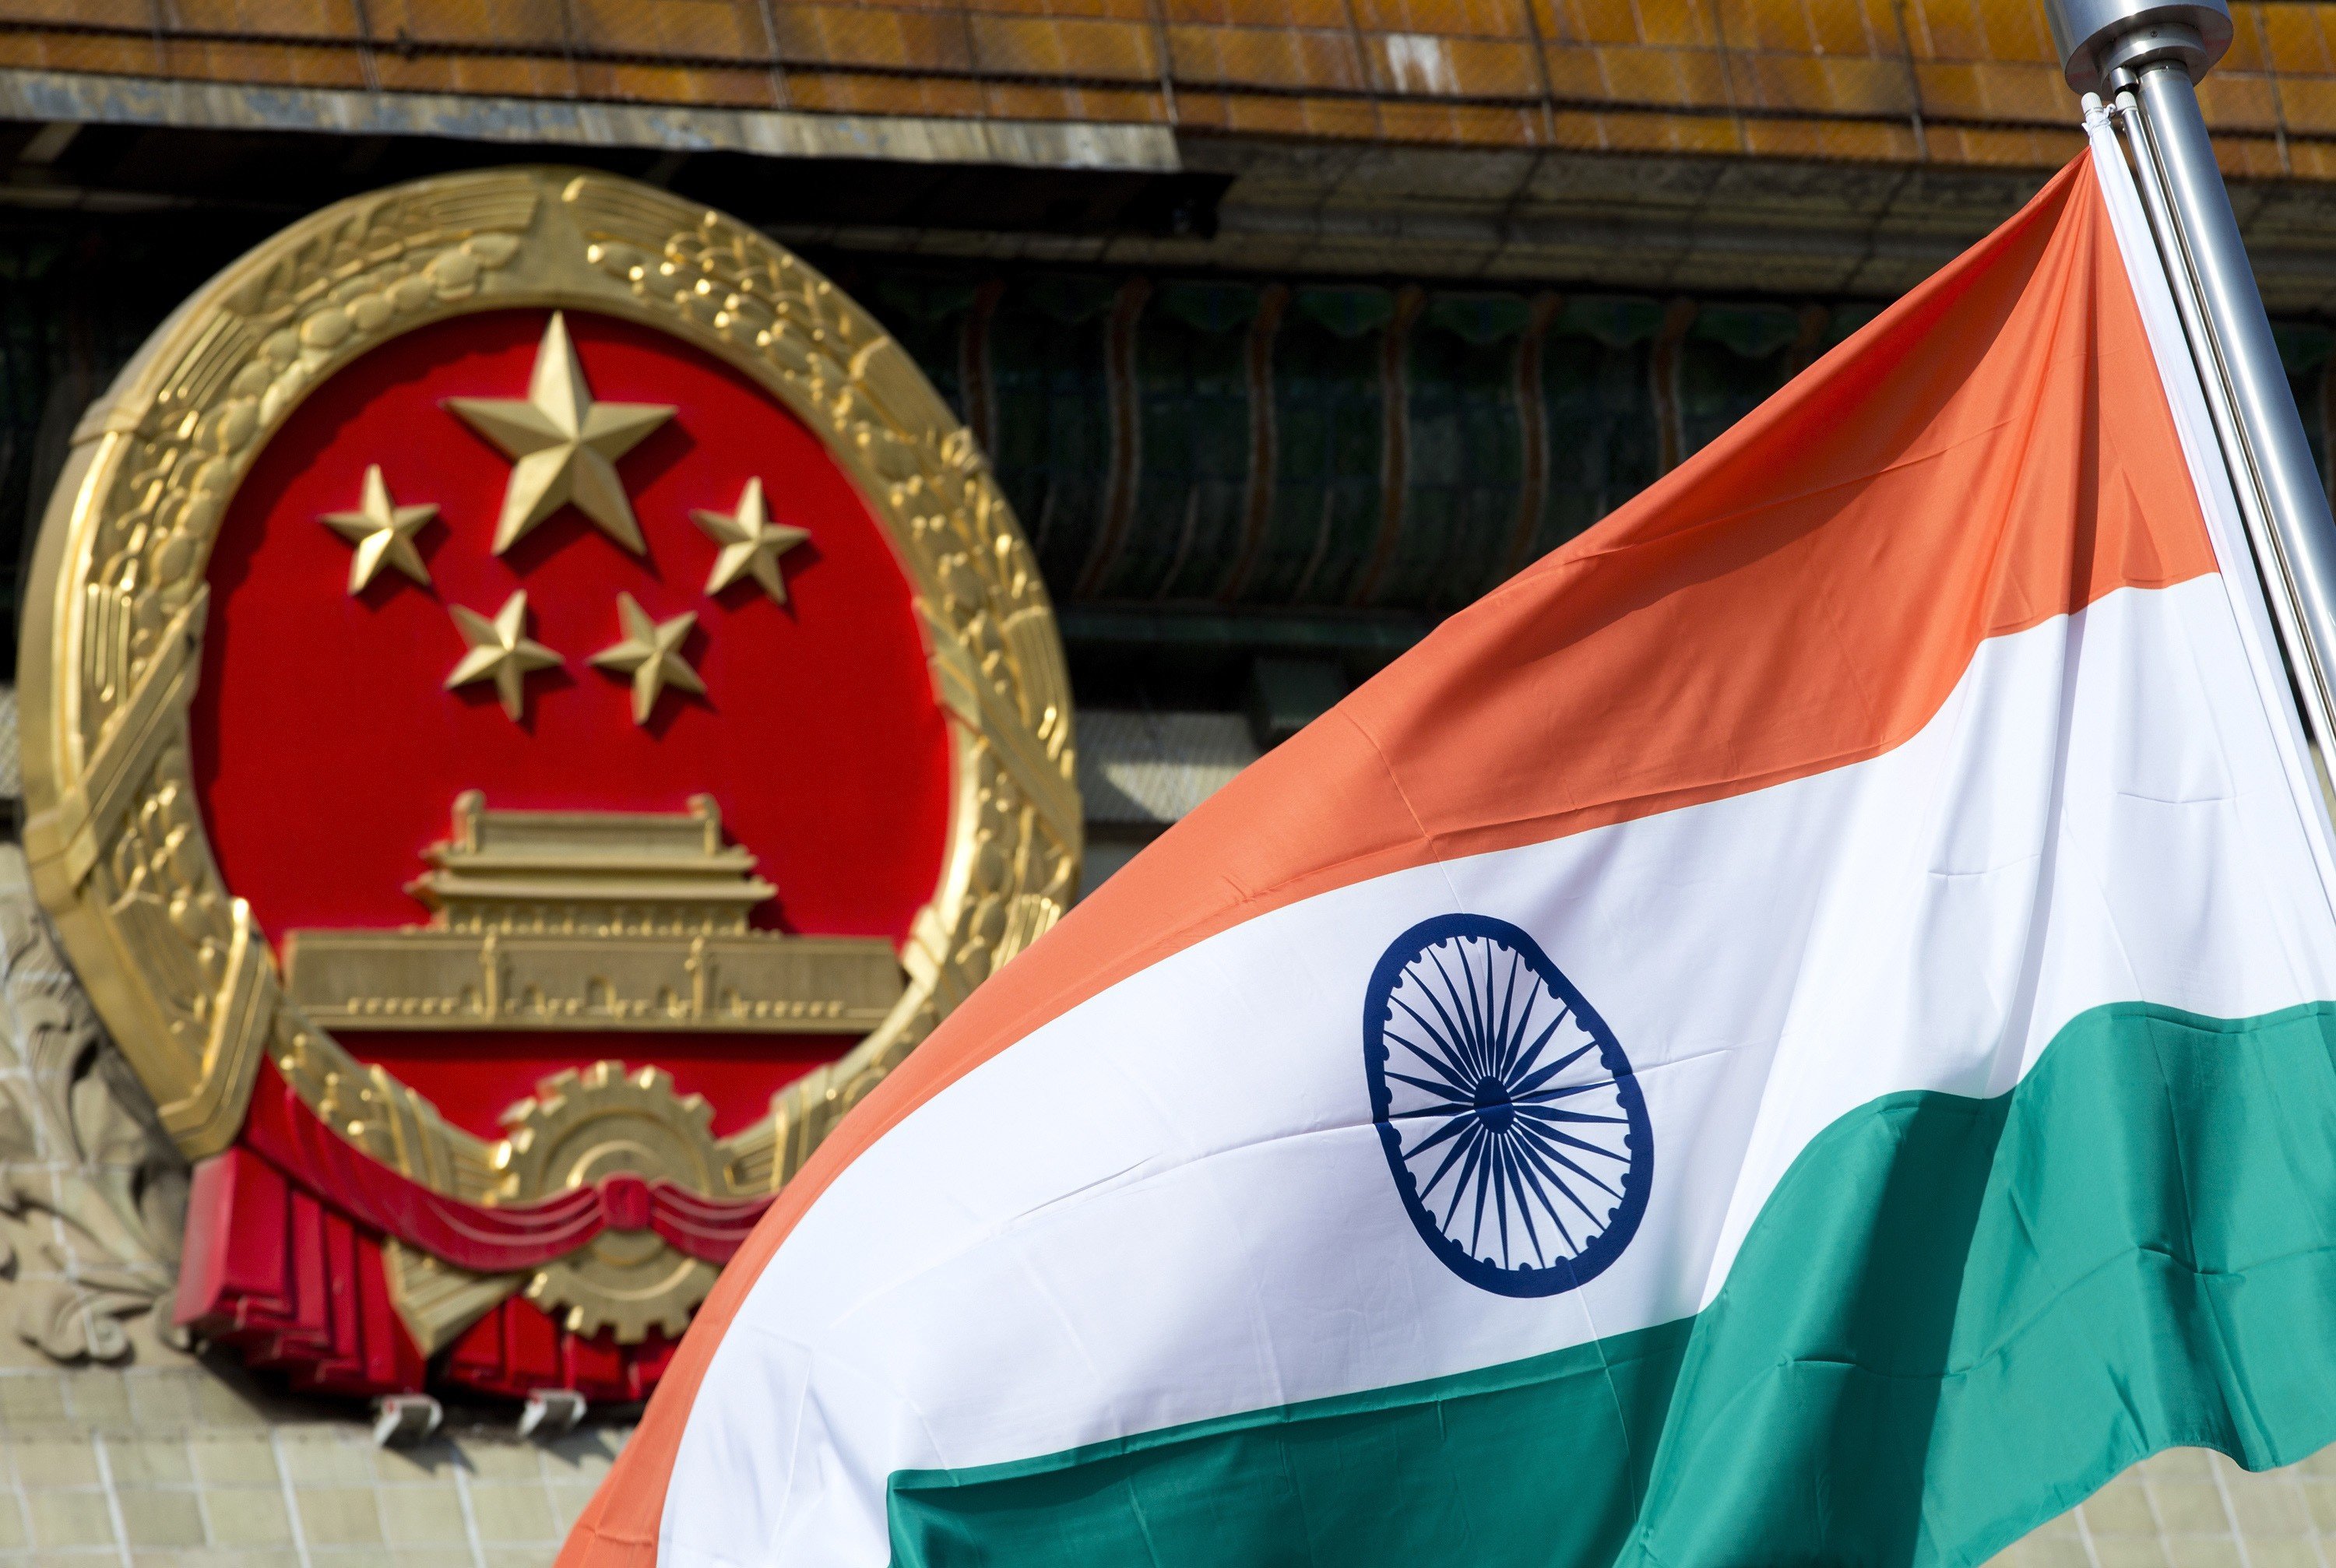 An Indian national flag is flown next to the Chinese national emblem outside the Great Hall of the People in Beijing in this 2013 file photo. Photo: Associated Press